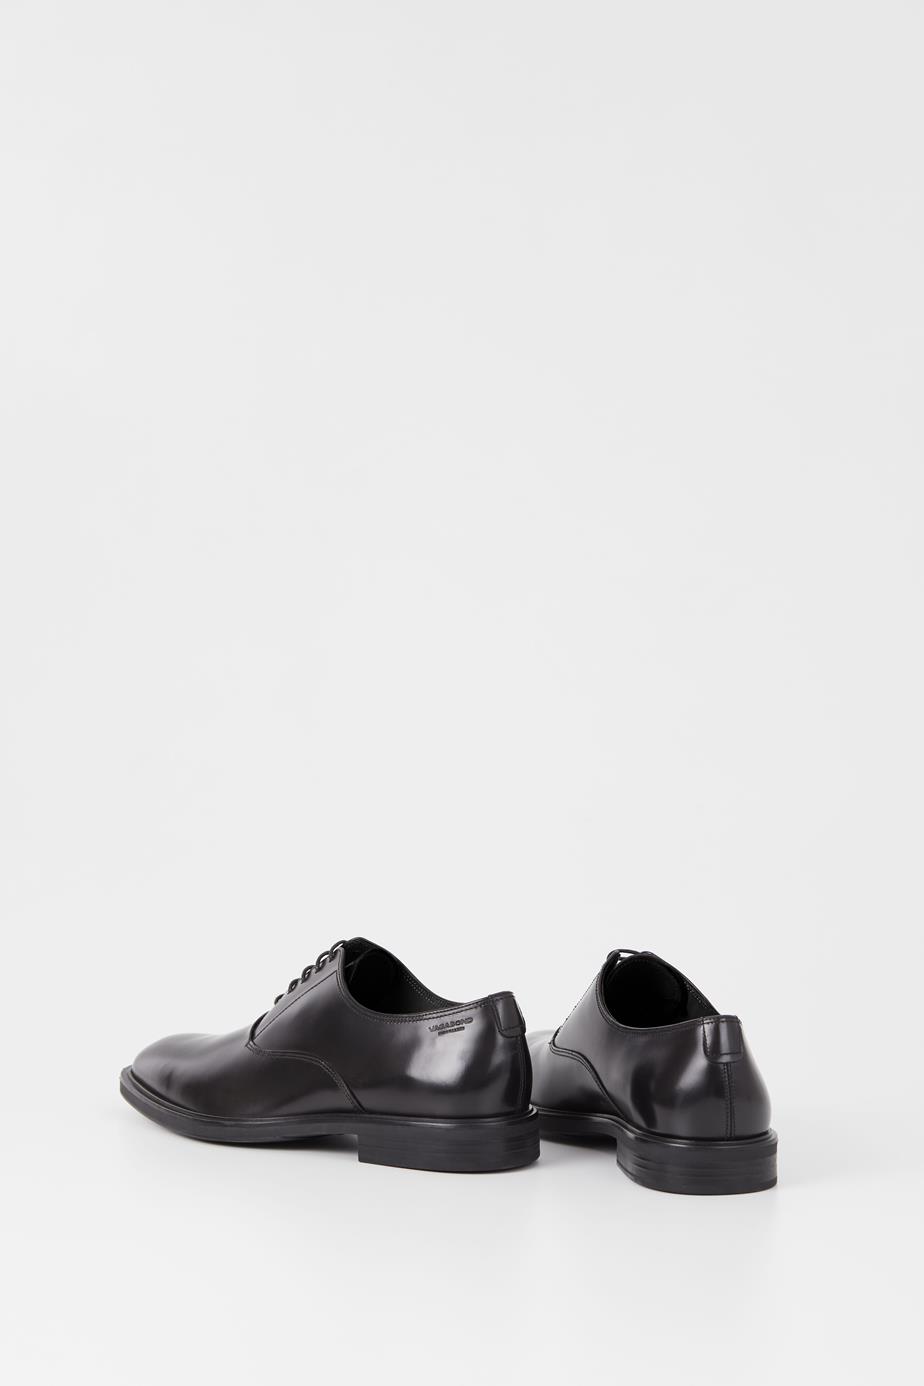 Andrew shoes Black polished leather